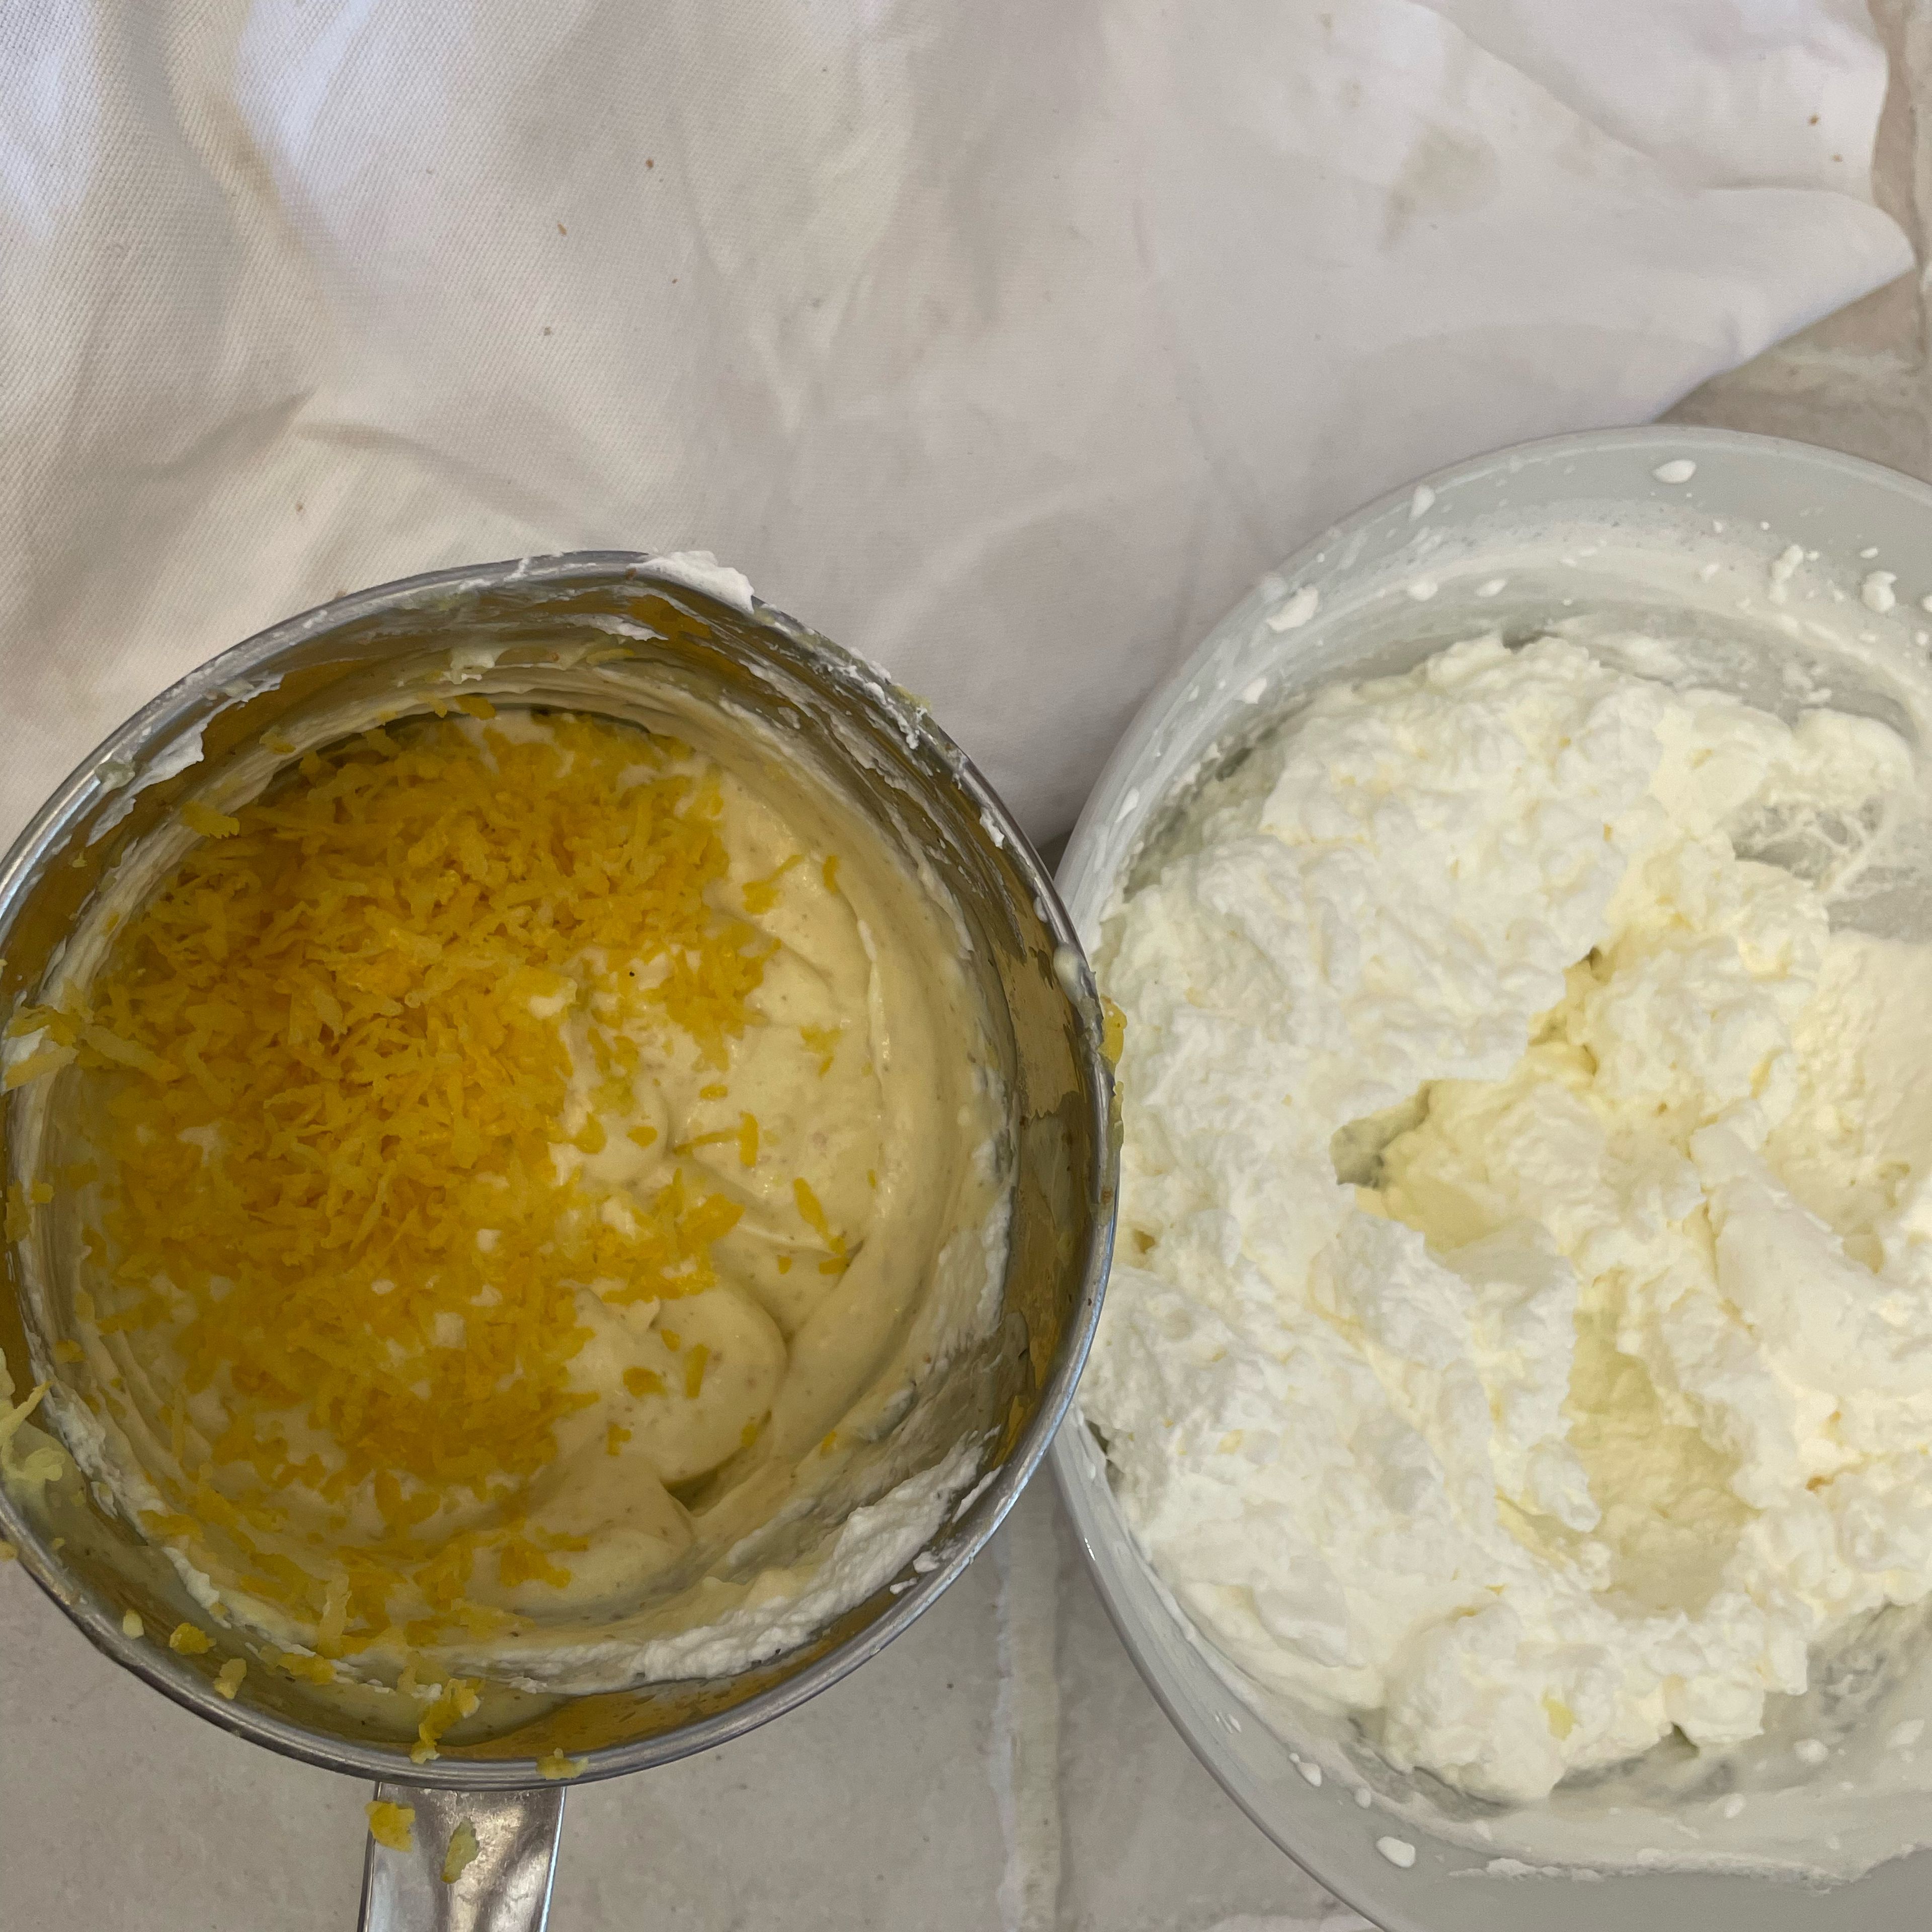 Whip 400 gr of cooking cream. Set around 300gr aside while add 100gr to the previously prepared and cooled down lemon custard cream. Add some more lemon zest and mix slowly.